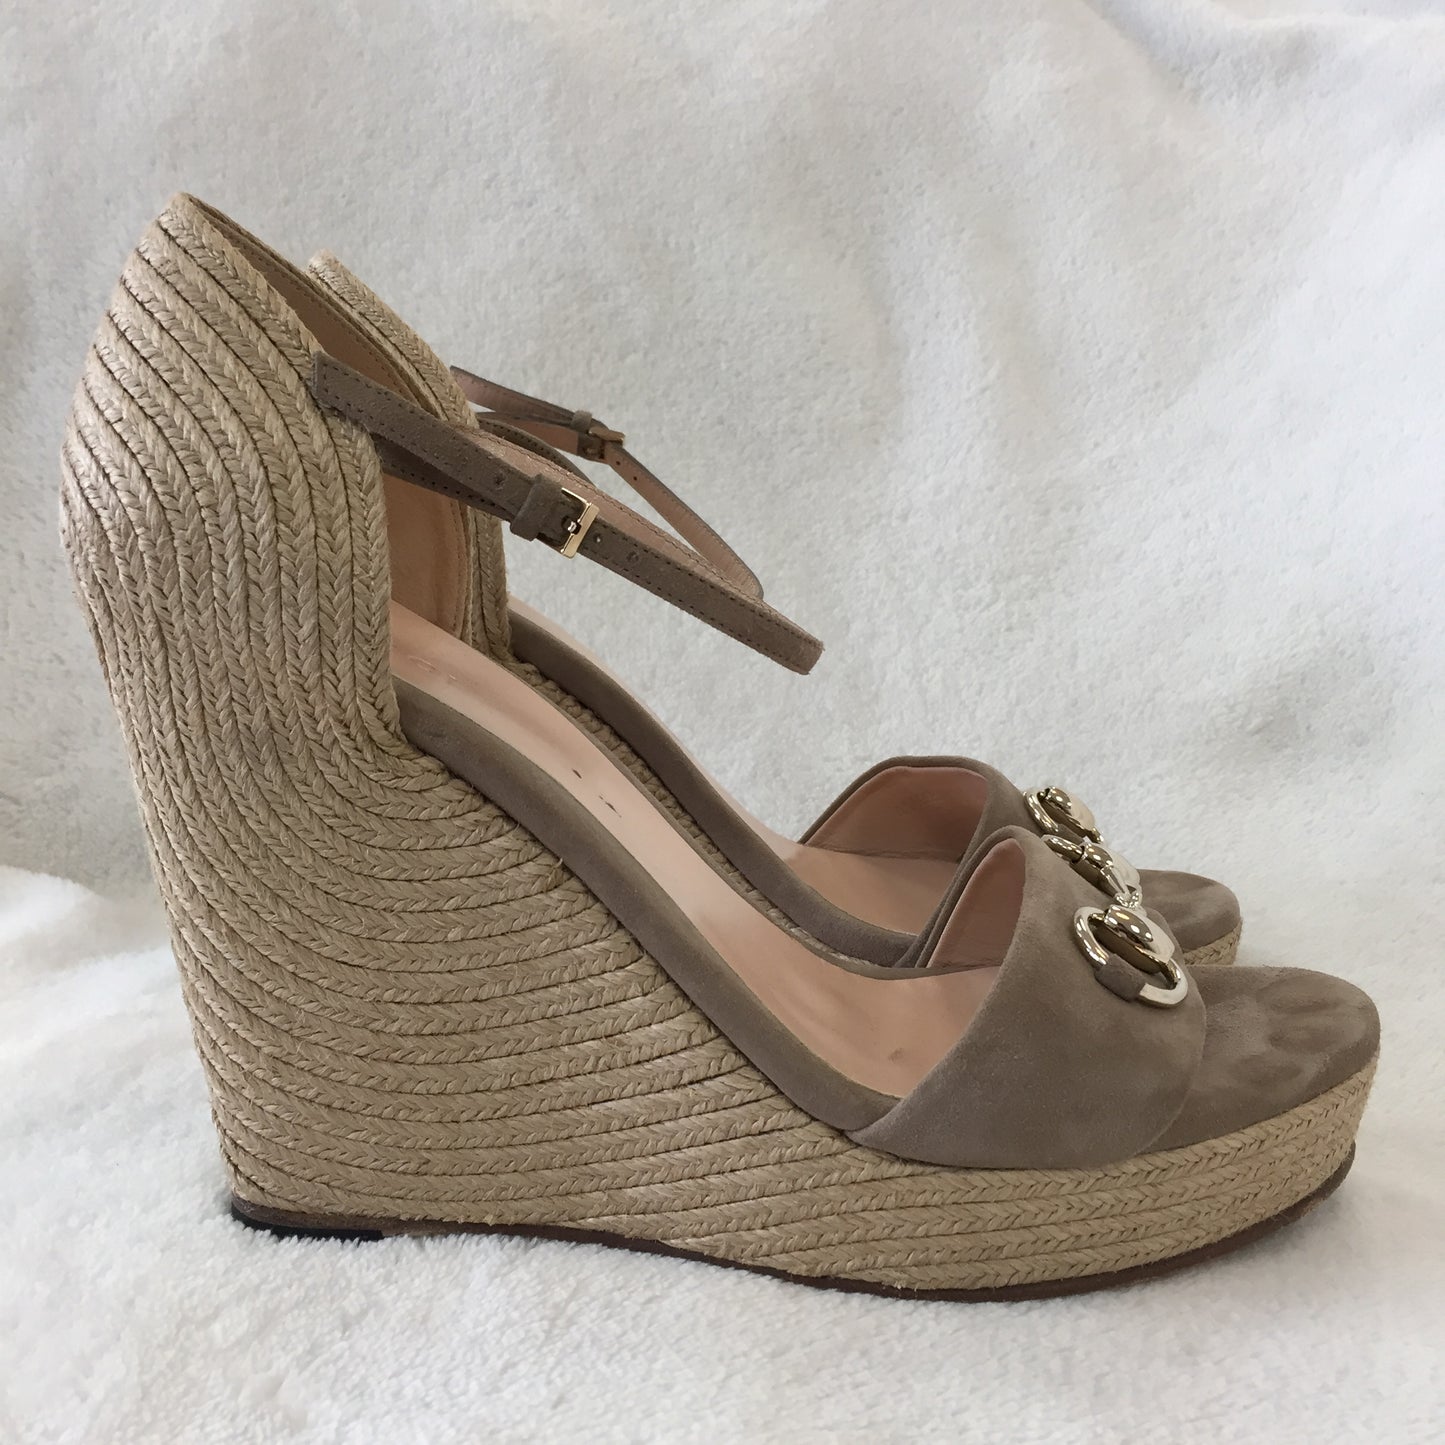 Authentic Gucci Taupe Horsebit Wedge Sandals Women's Size 40 / 9.5